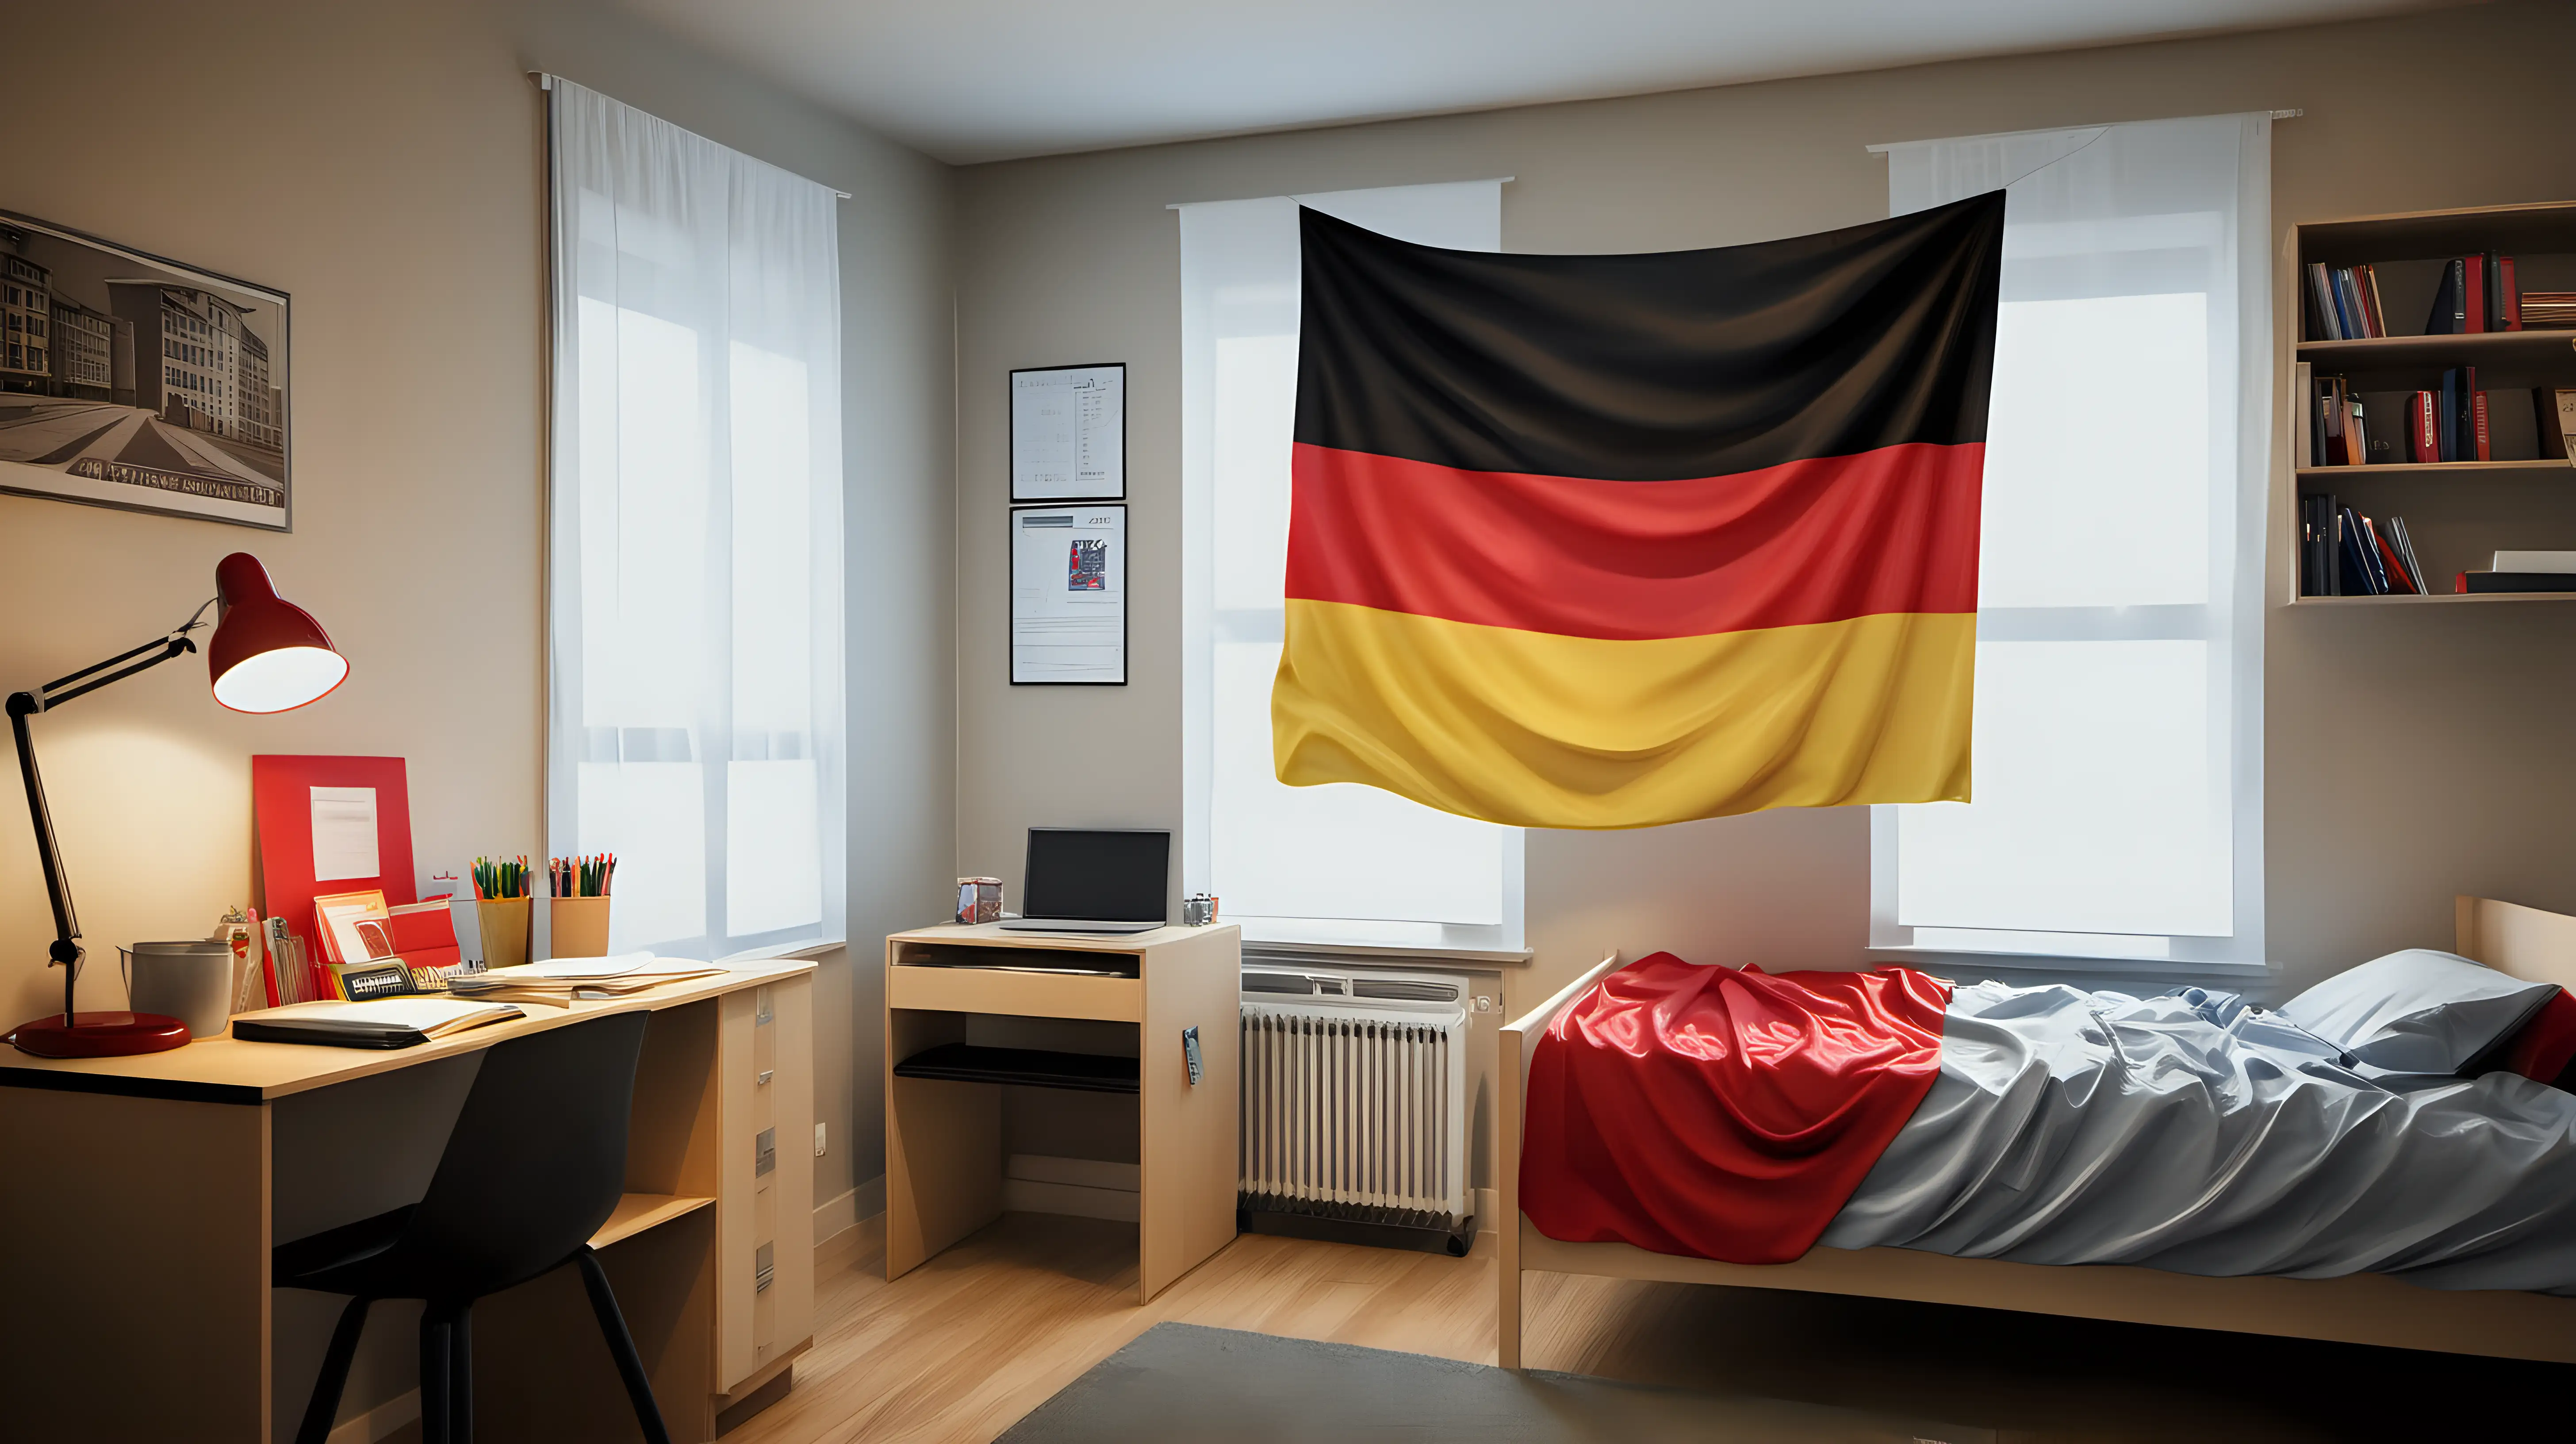 Craft a scene of a student studying abroad, displaying the German flag in their dorm room, expressing patriotism and a connection to their homeland.